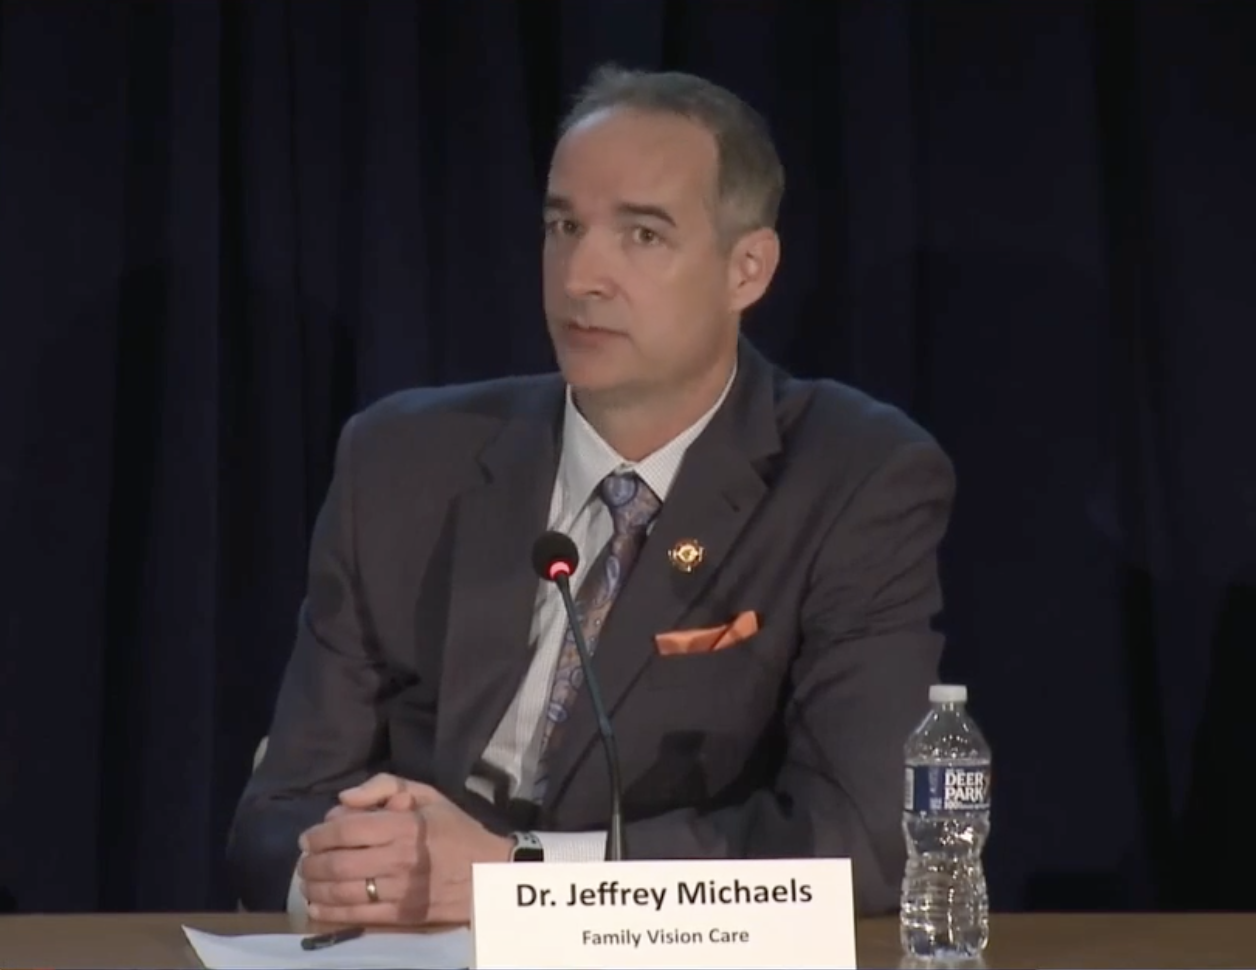 During the FTC workshop's panel discussion, Jeffrey Michaels, OD, co-owner of Family Vision Care of Richmond and chair of AOA Federal & Regulatory Policy Communications, pressed the point that ODs and MDs have already been properly releasing prescriptions for years.